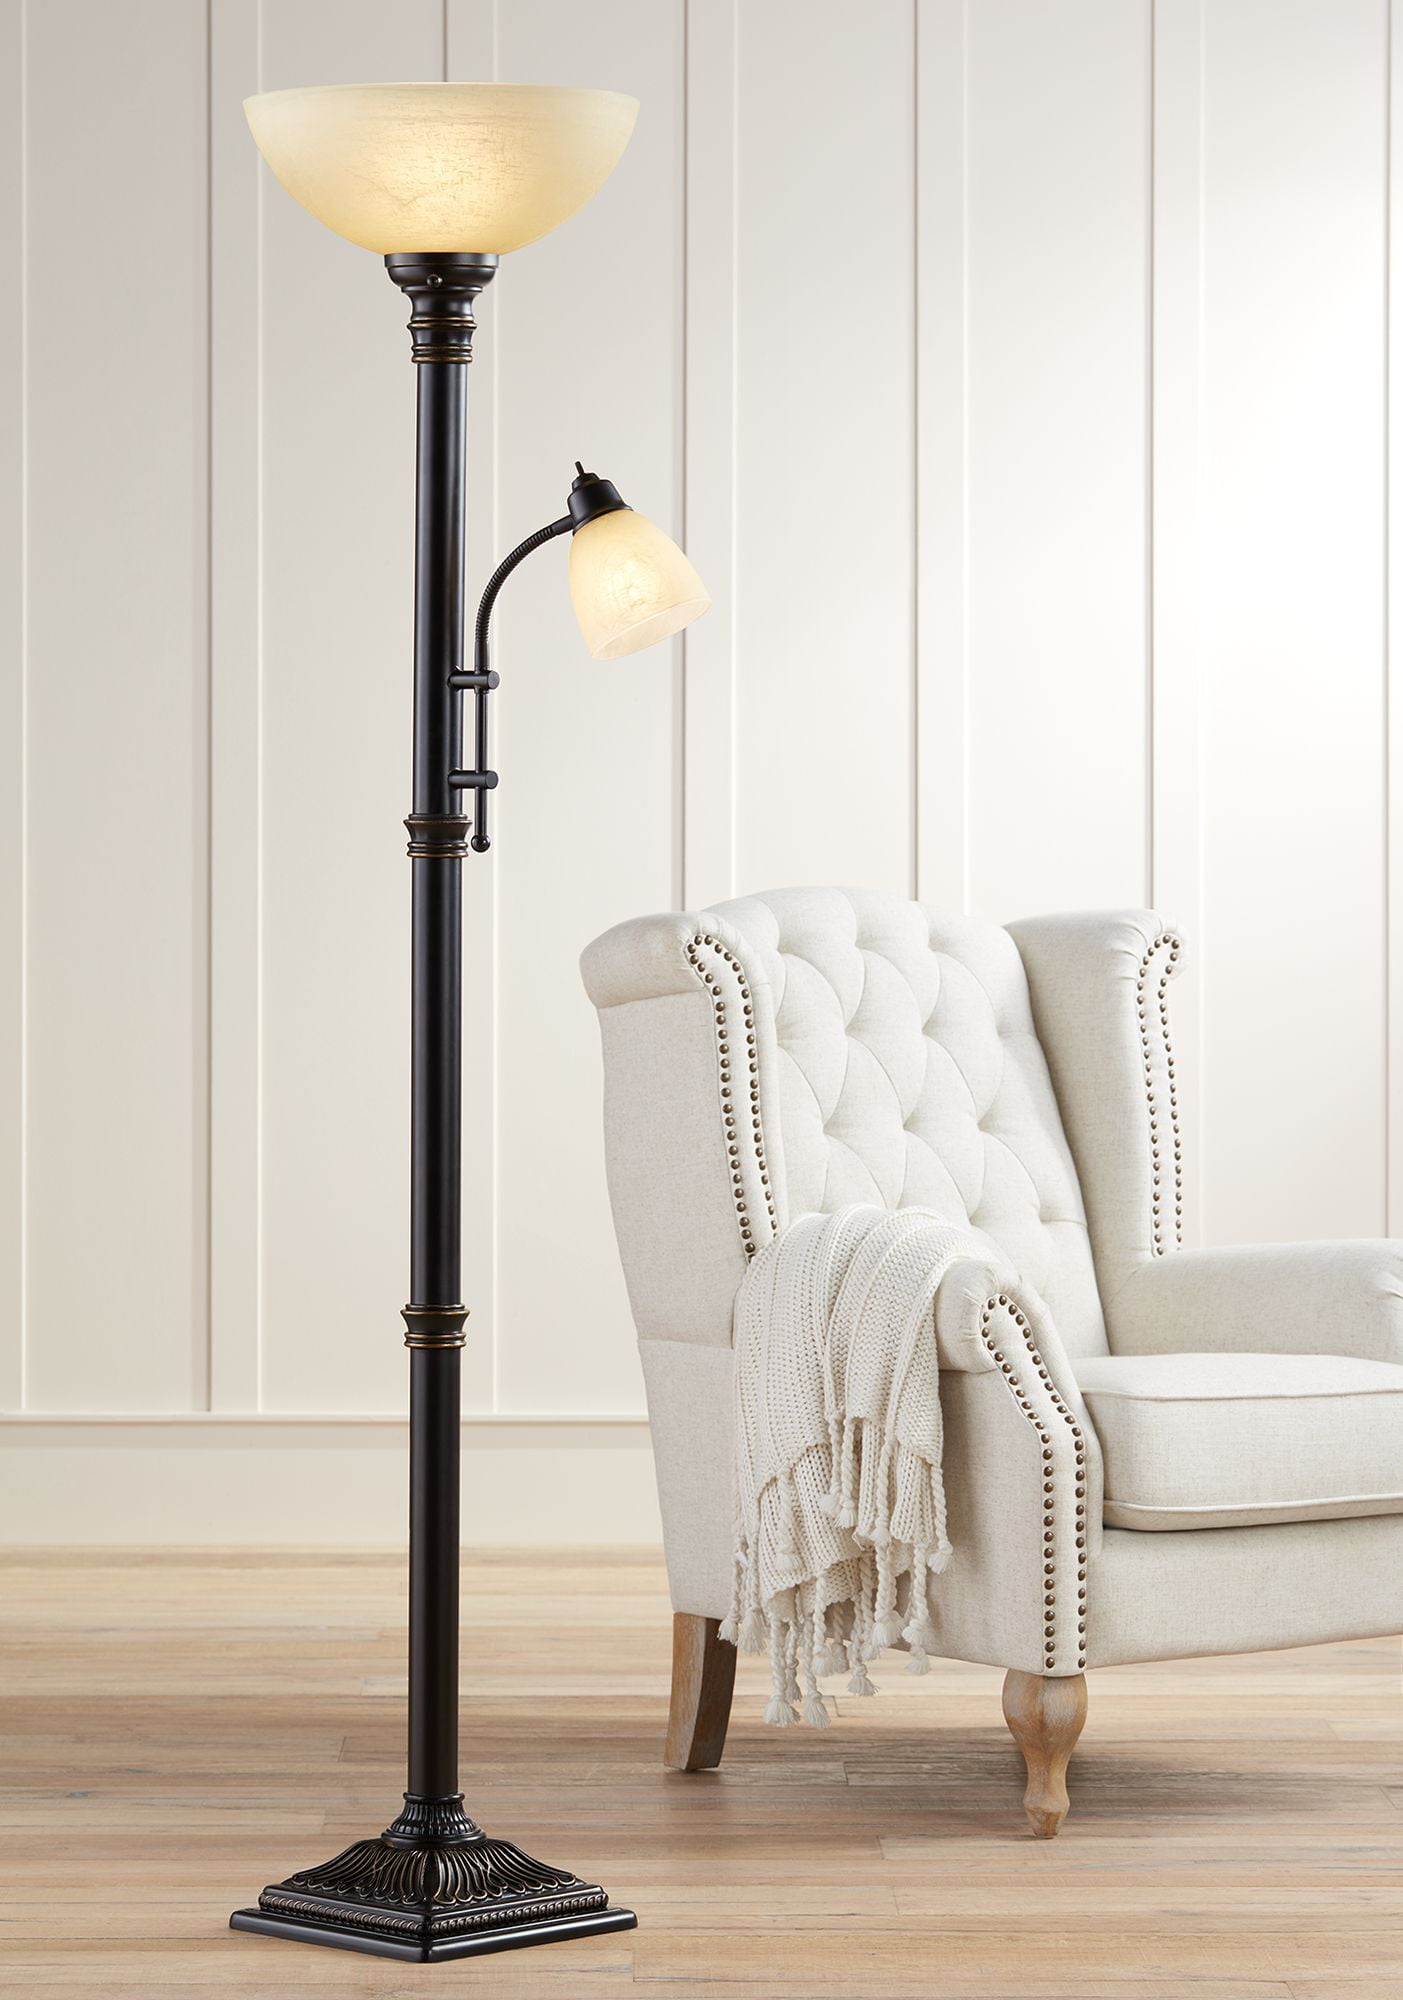 Regency Hill Traditional Torchiere Floor Lamp 2 Light 72 5 quot Tall Oiled 